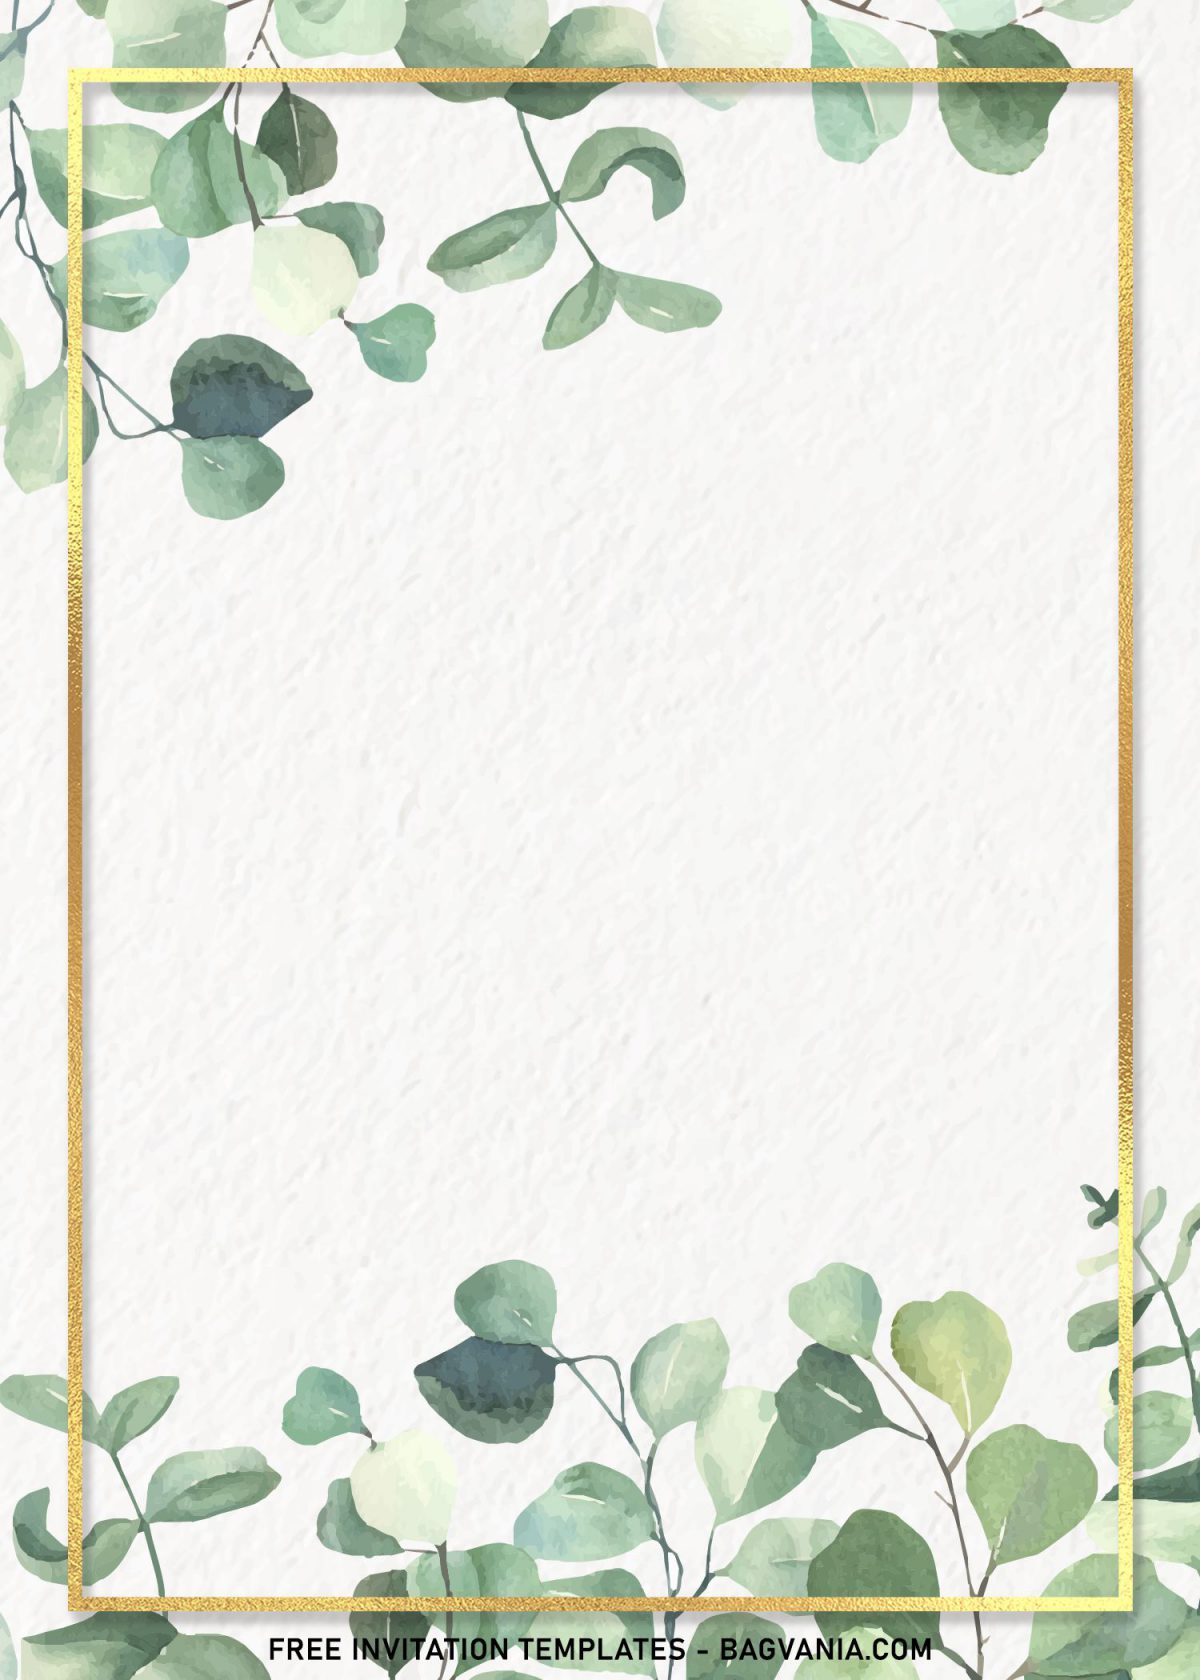 7+ Greenery Birthday Invitation Templates For Beautiful Botanical Birthday Party and has metallic gold frame